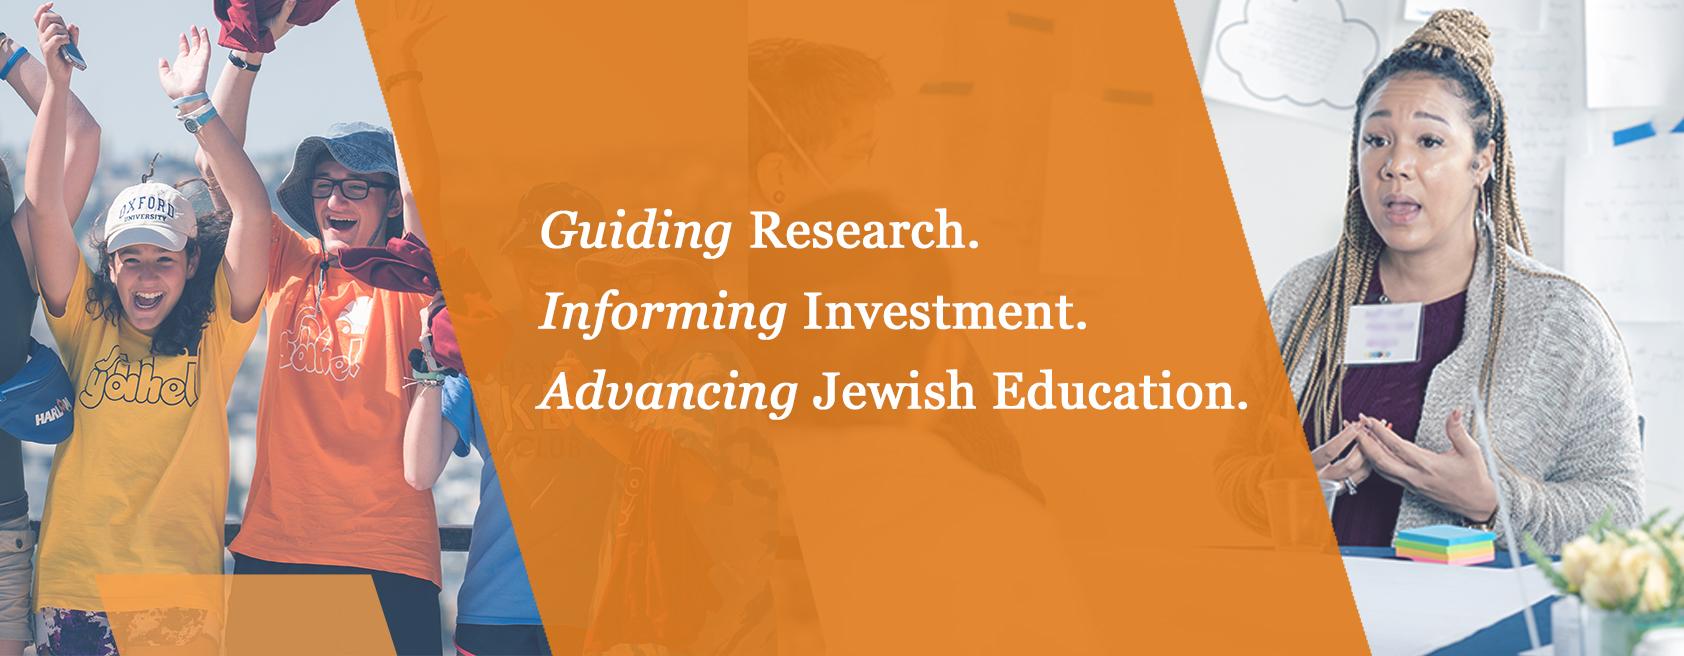 Decorative header that includes two photos of Jewish professionals in the background and an orange background behind text that reads "Guiding Research. Informing Investment. Advancing Jewish Education."